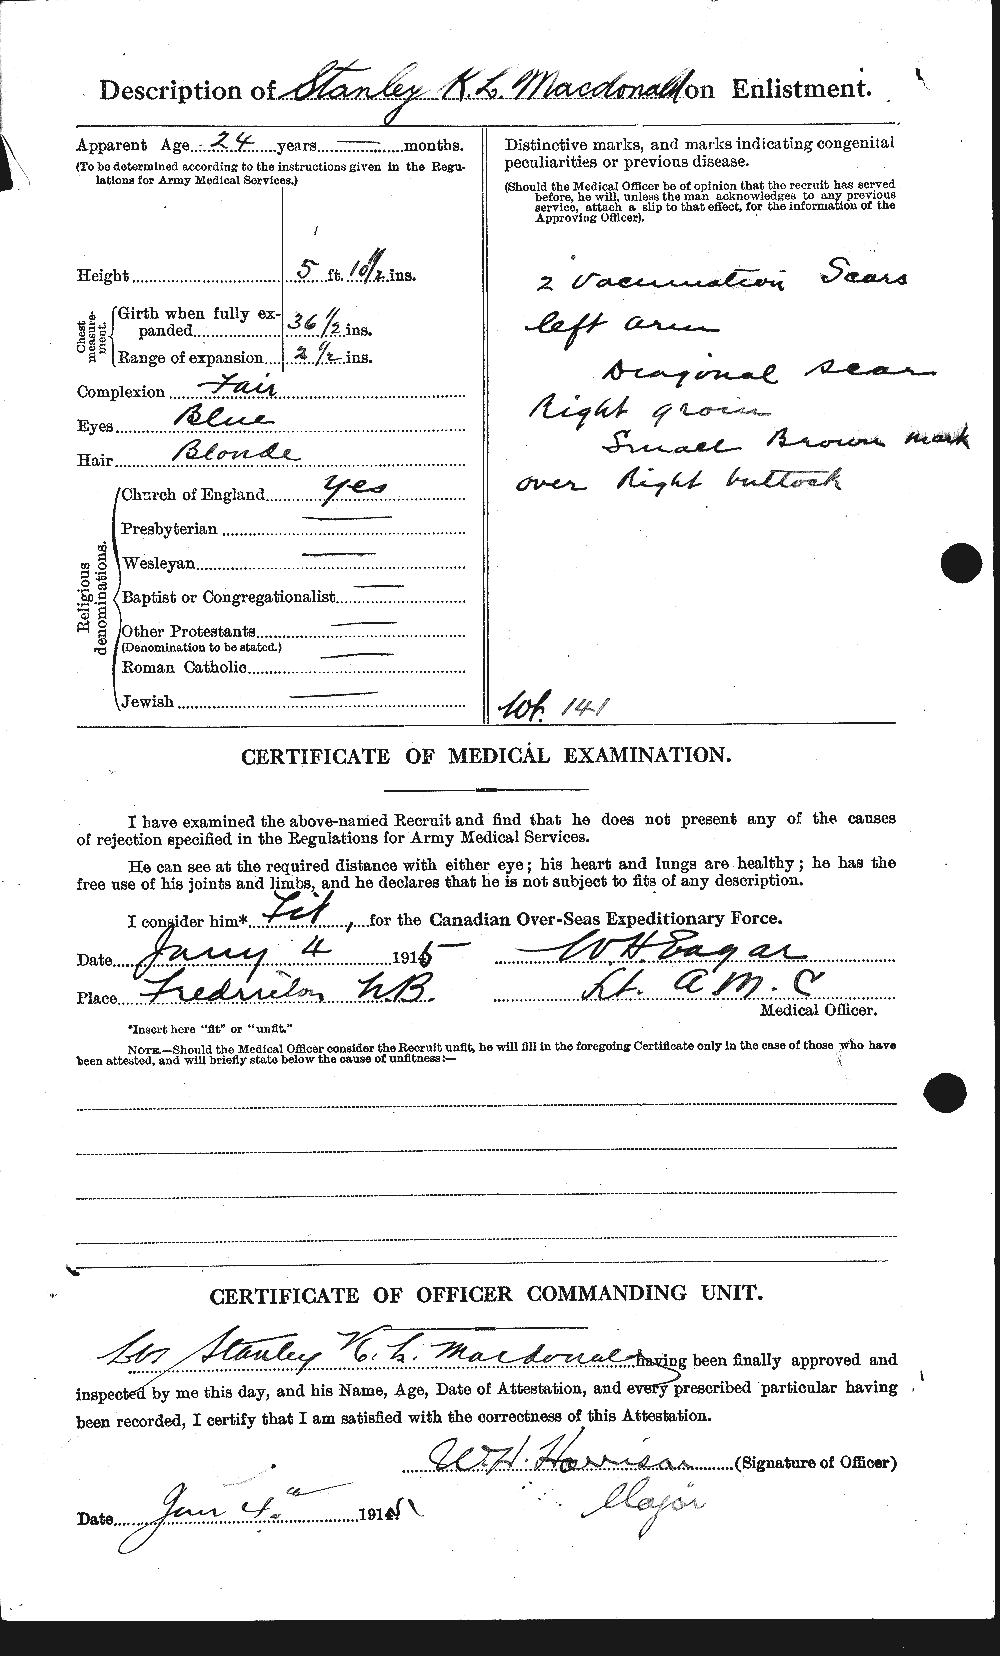 Personnel Records of the First World War - CEF 515911b